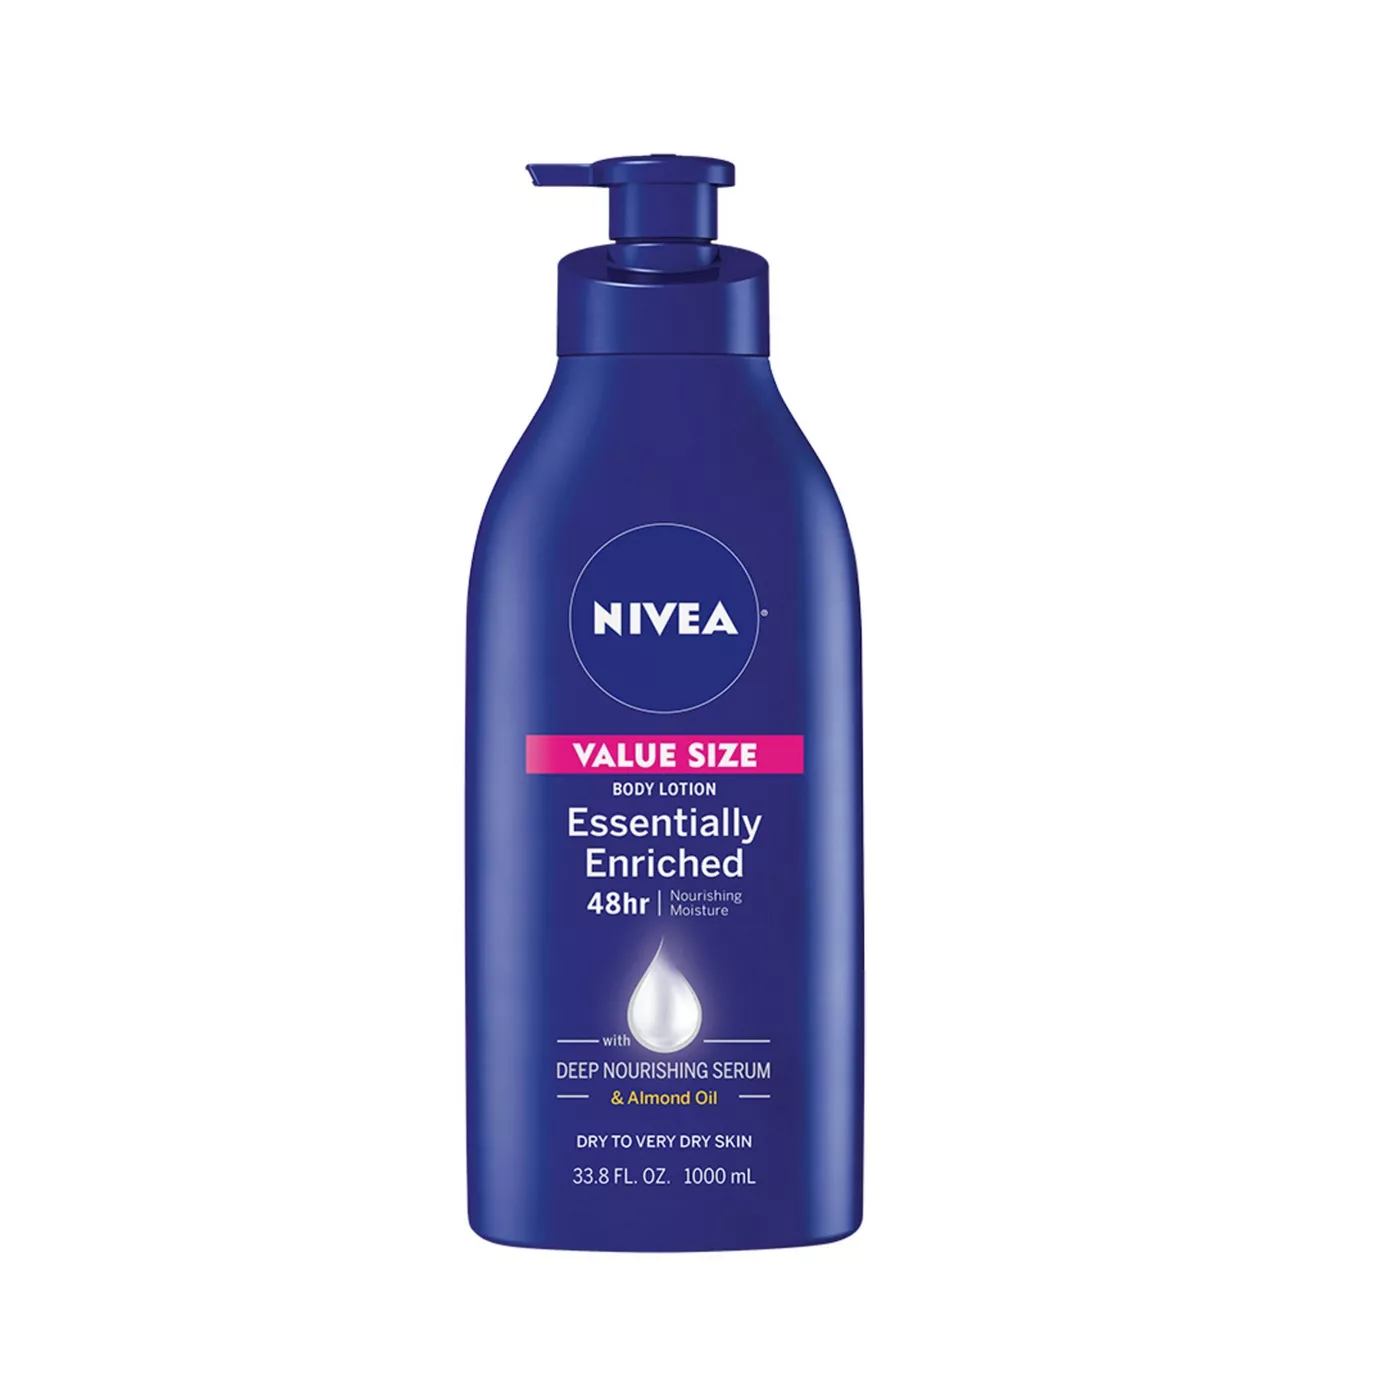 NIVEA Essentially Enriched Body Lotion - 33.8 fl oz - image 1 of 5